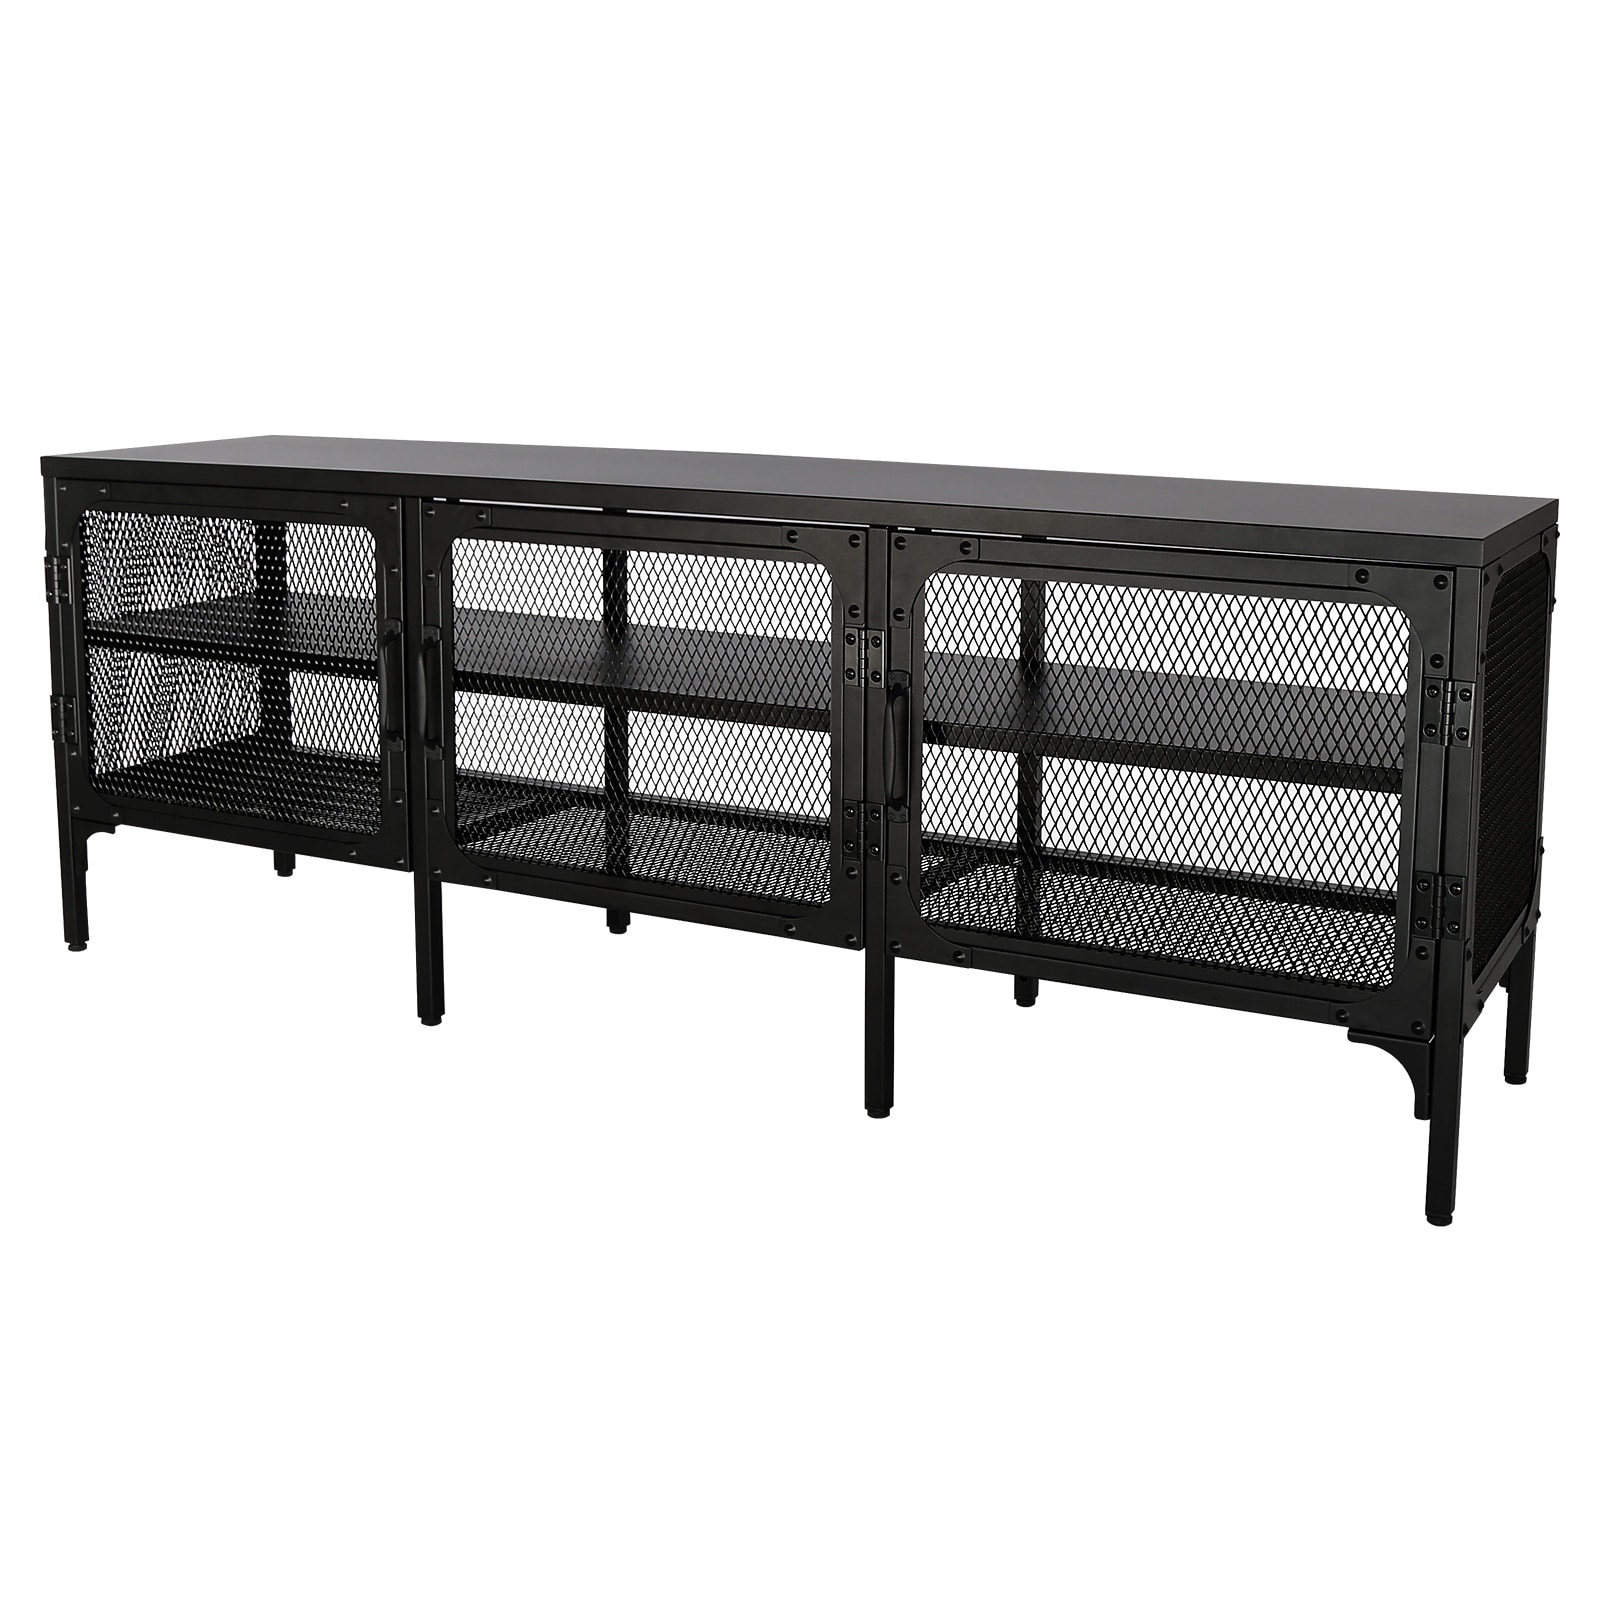 Elegant Black Metal TV Stand for 65-Inch TV, Clutter-Free 2-Tier Console Table with Mesh Doors and Cable Management